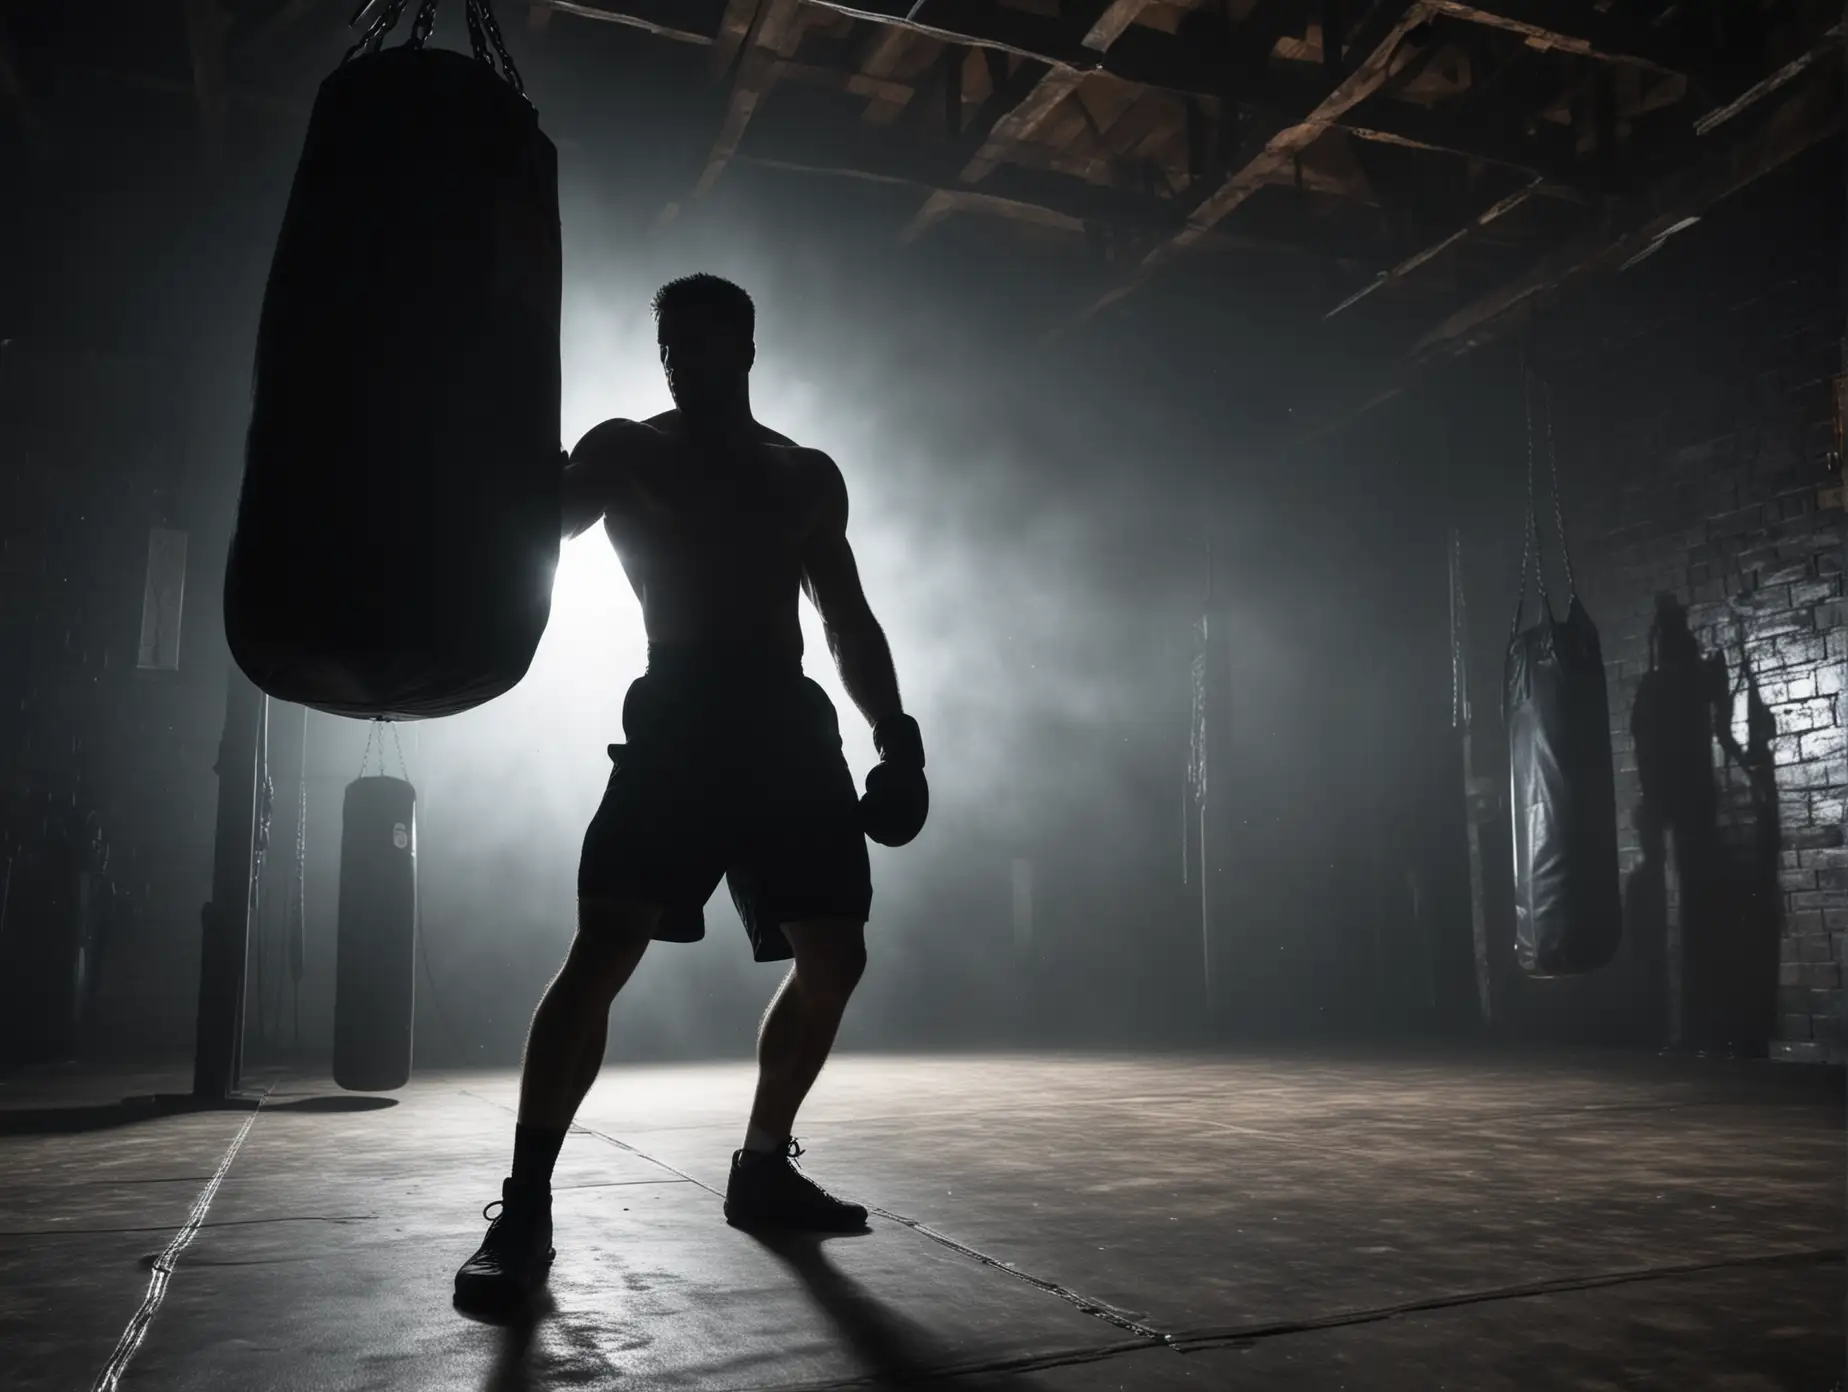 Silhouette of Lone Male Fighter Training with Heavy Bag in Dimly Lit Gym